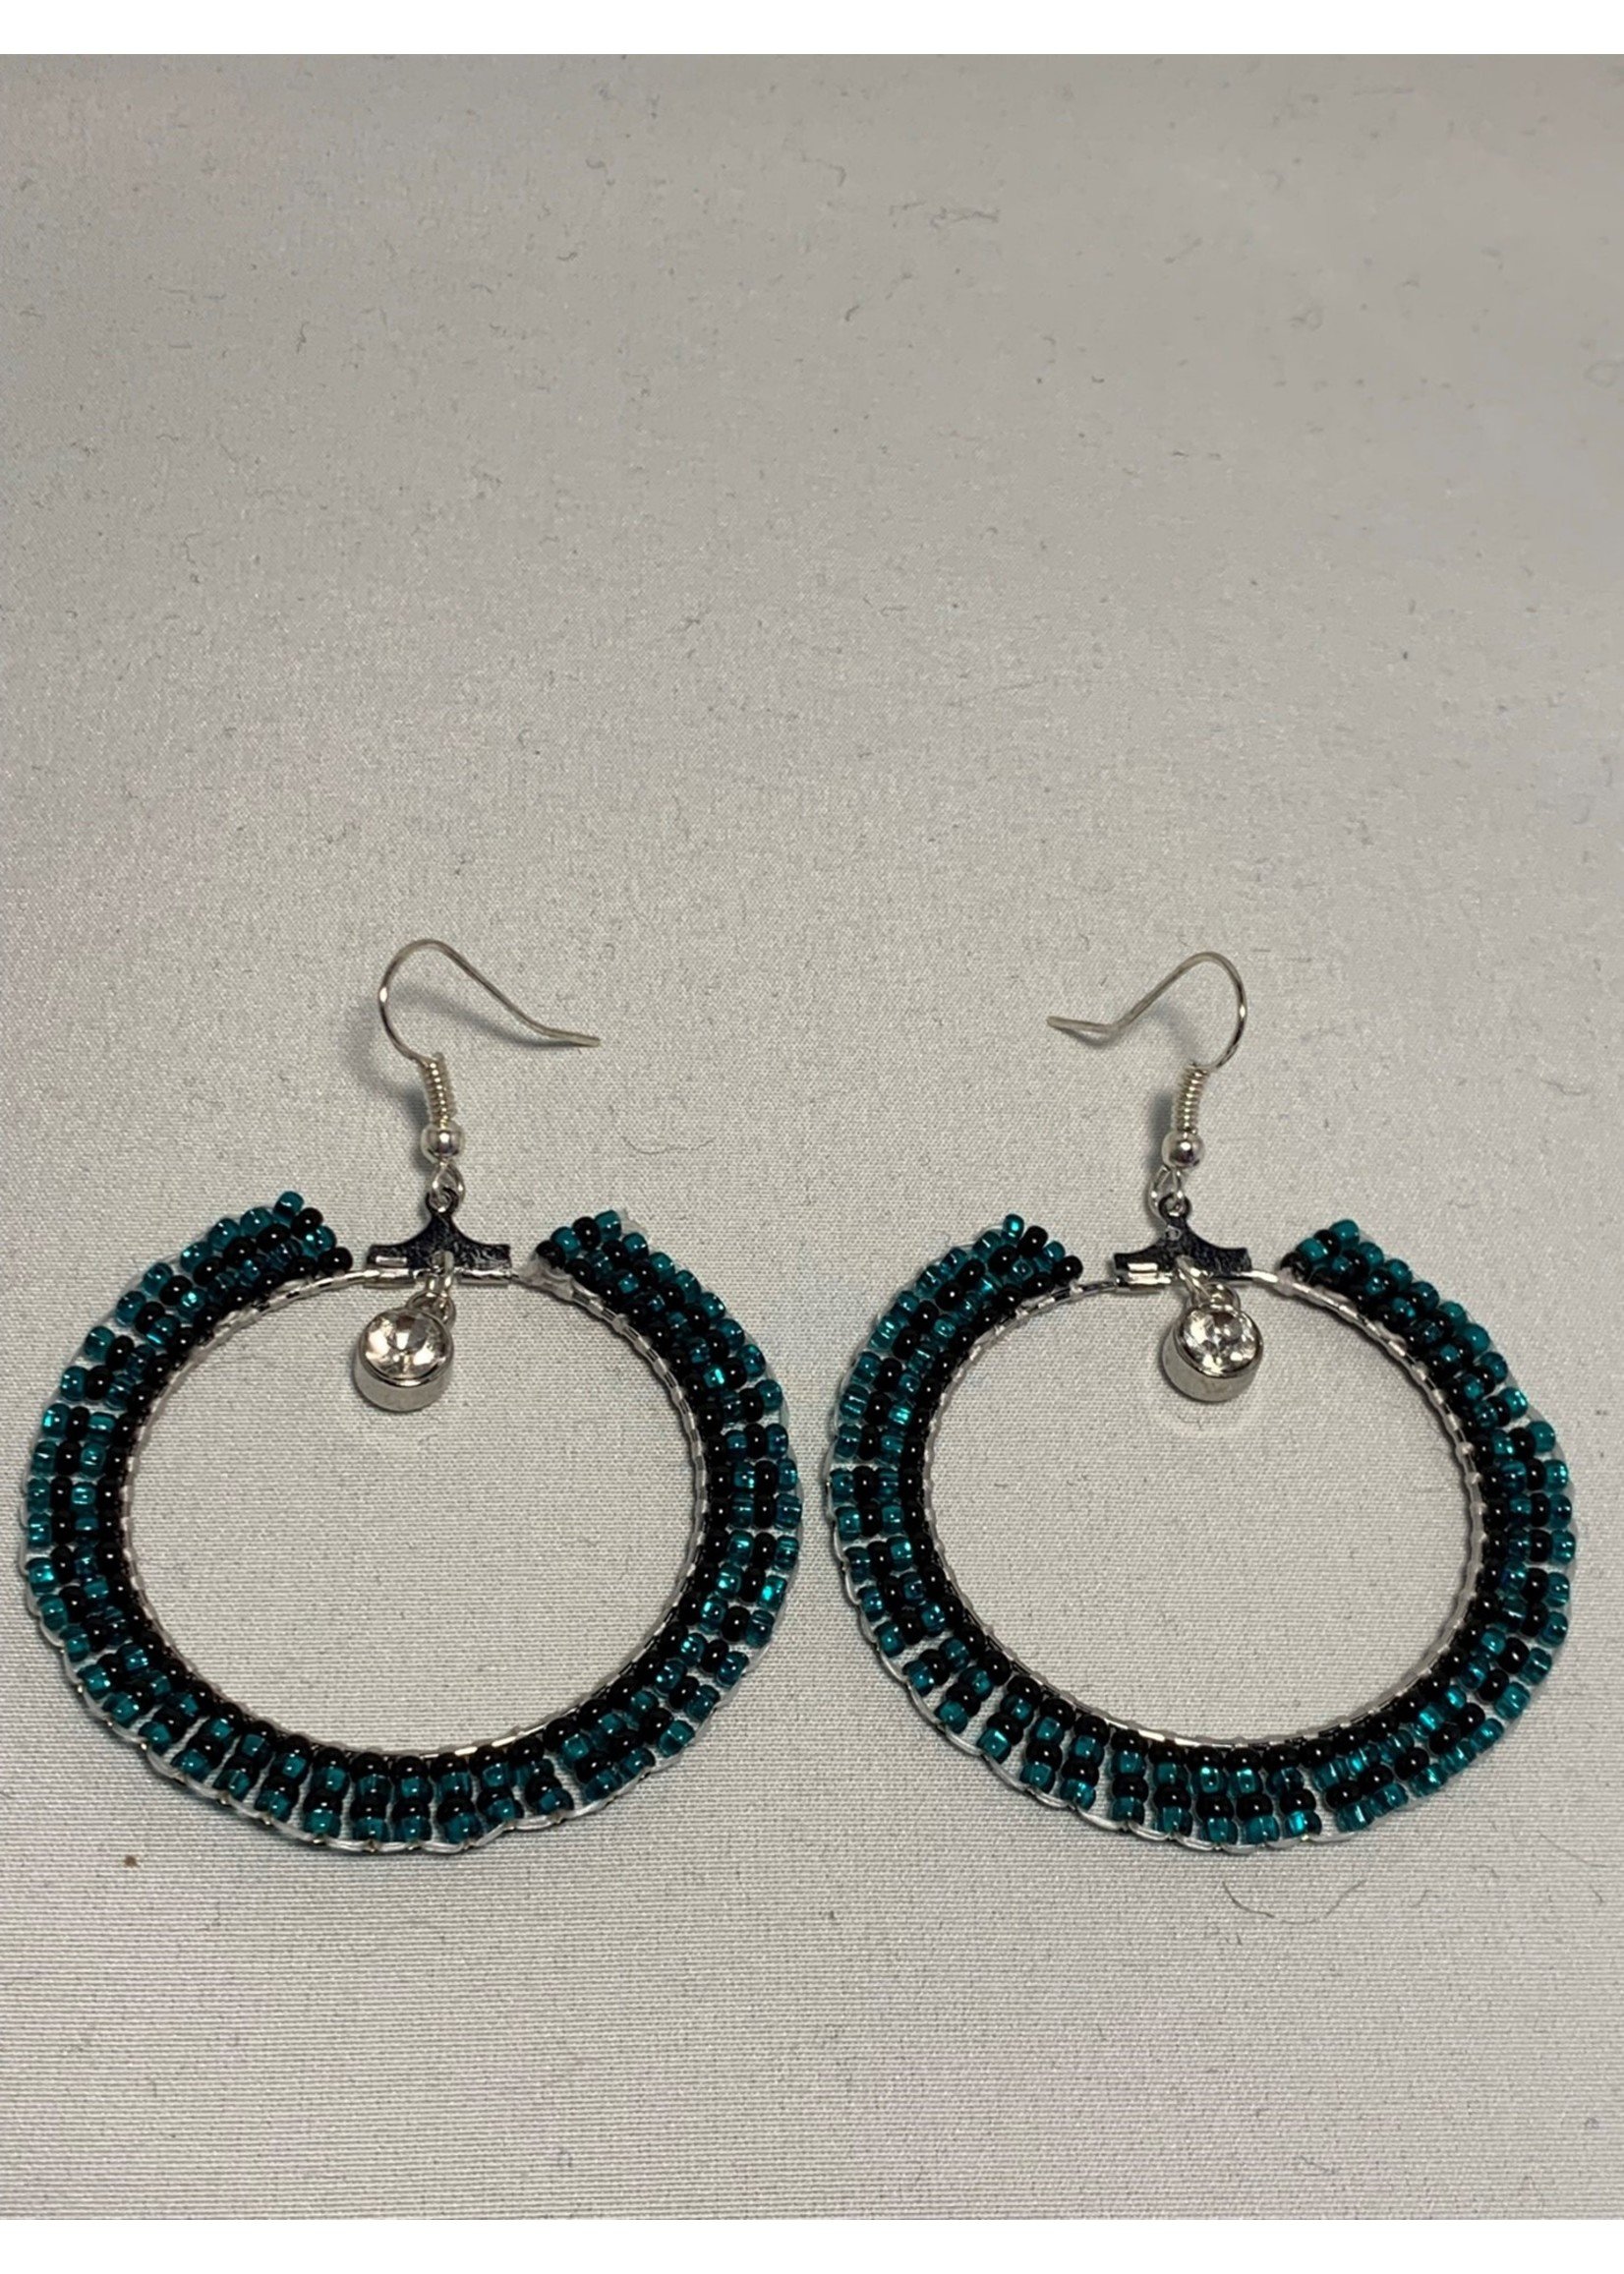 Beaded Earrings Hoops Silver Lined Turquoise and Opaque Black with Jewel (SOLD)